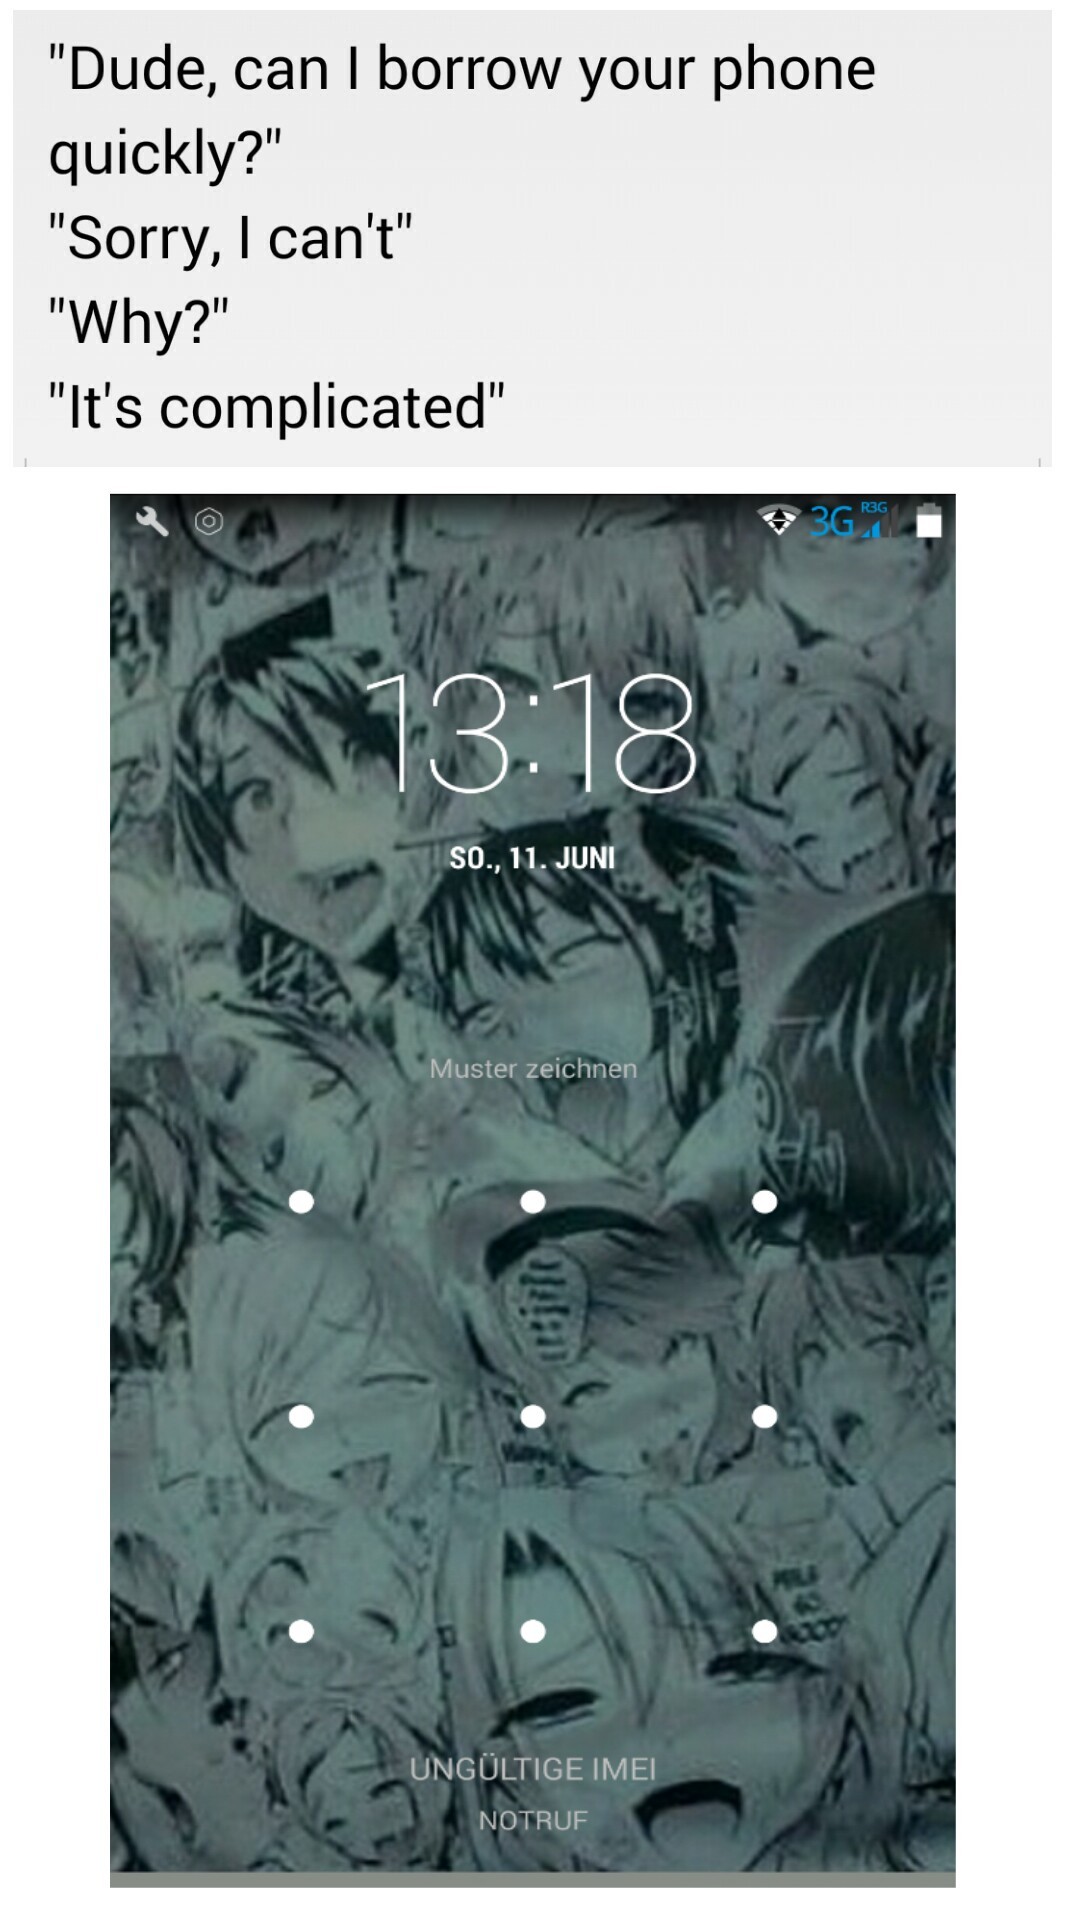 I had to change my wallpaper for this meme